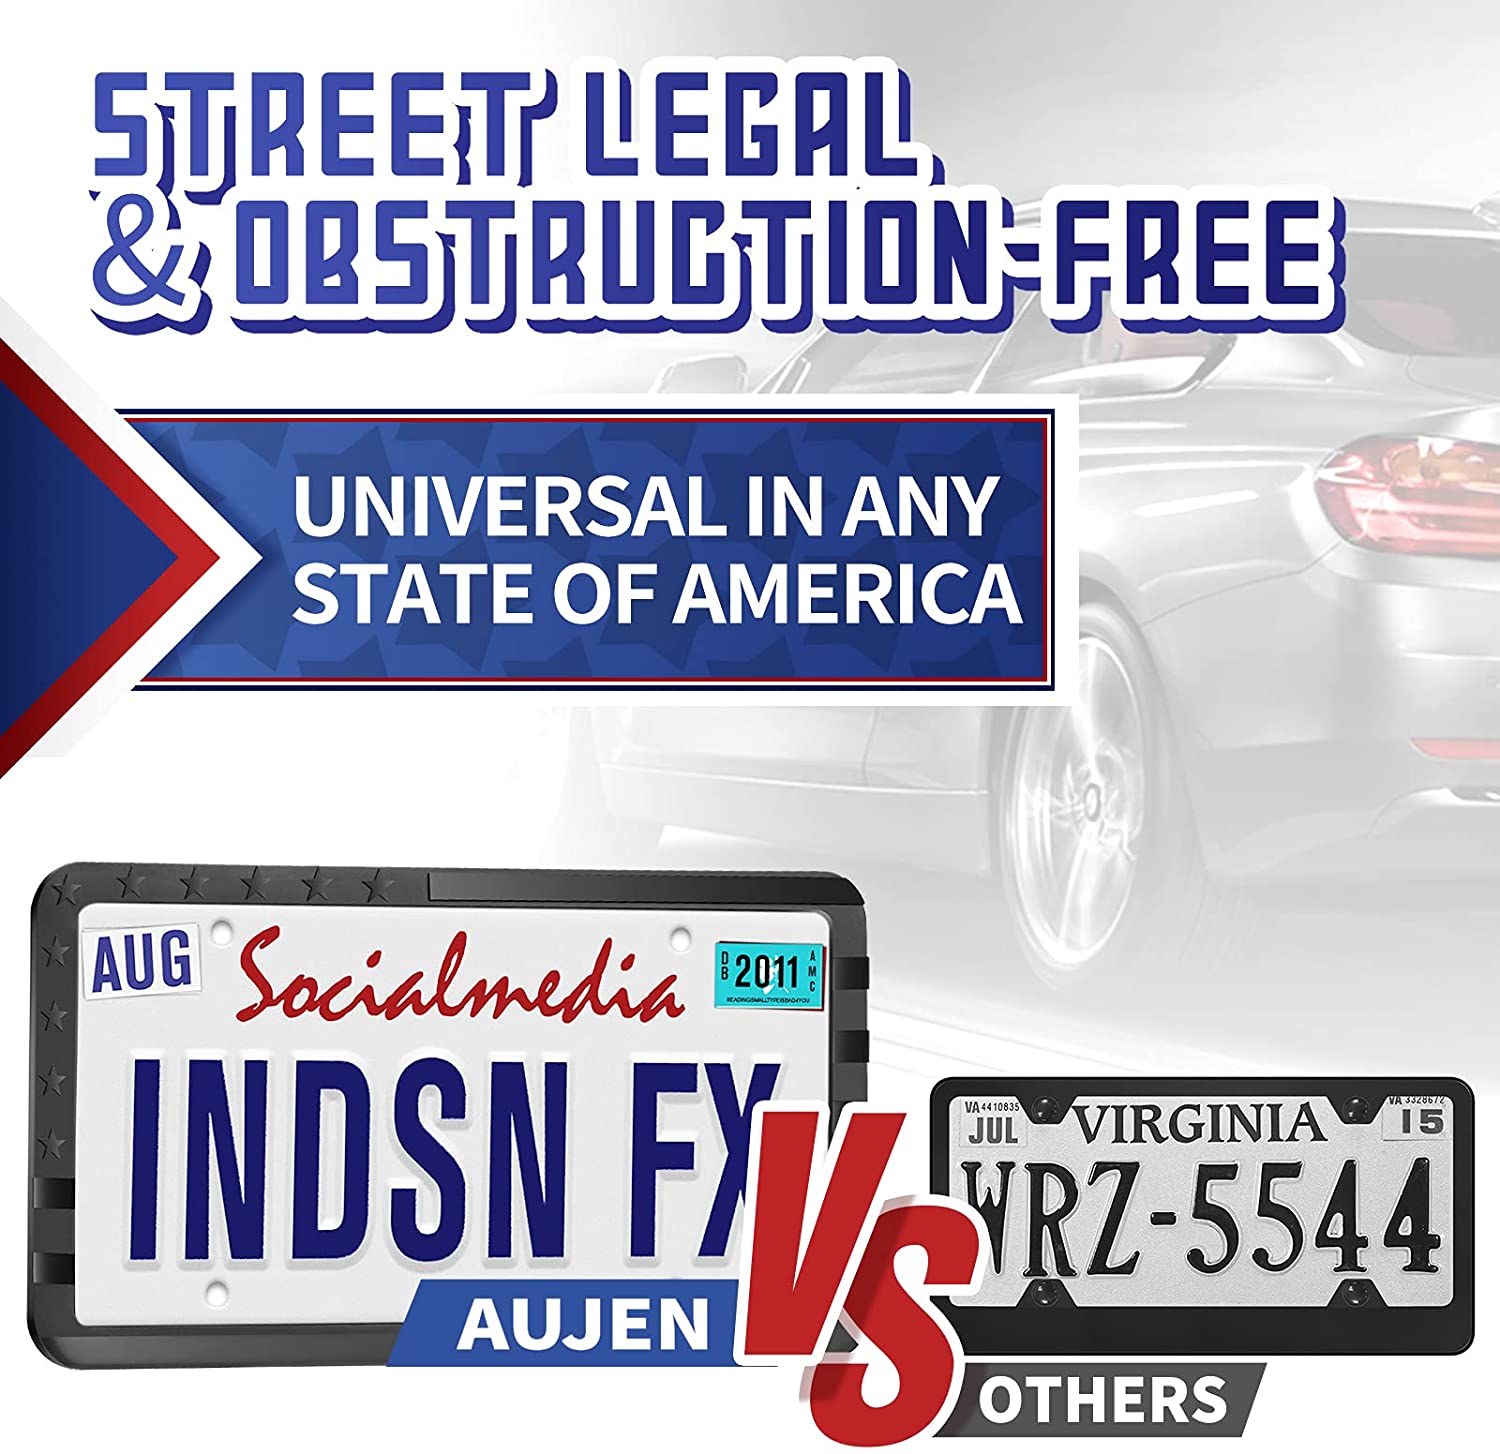 E Paper License Plates Now Street-Legal in California - IEEE Spectrum